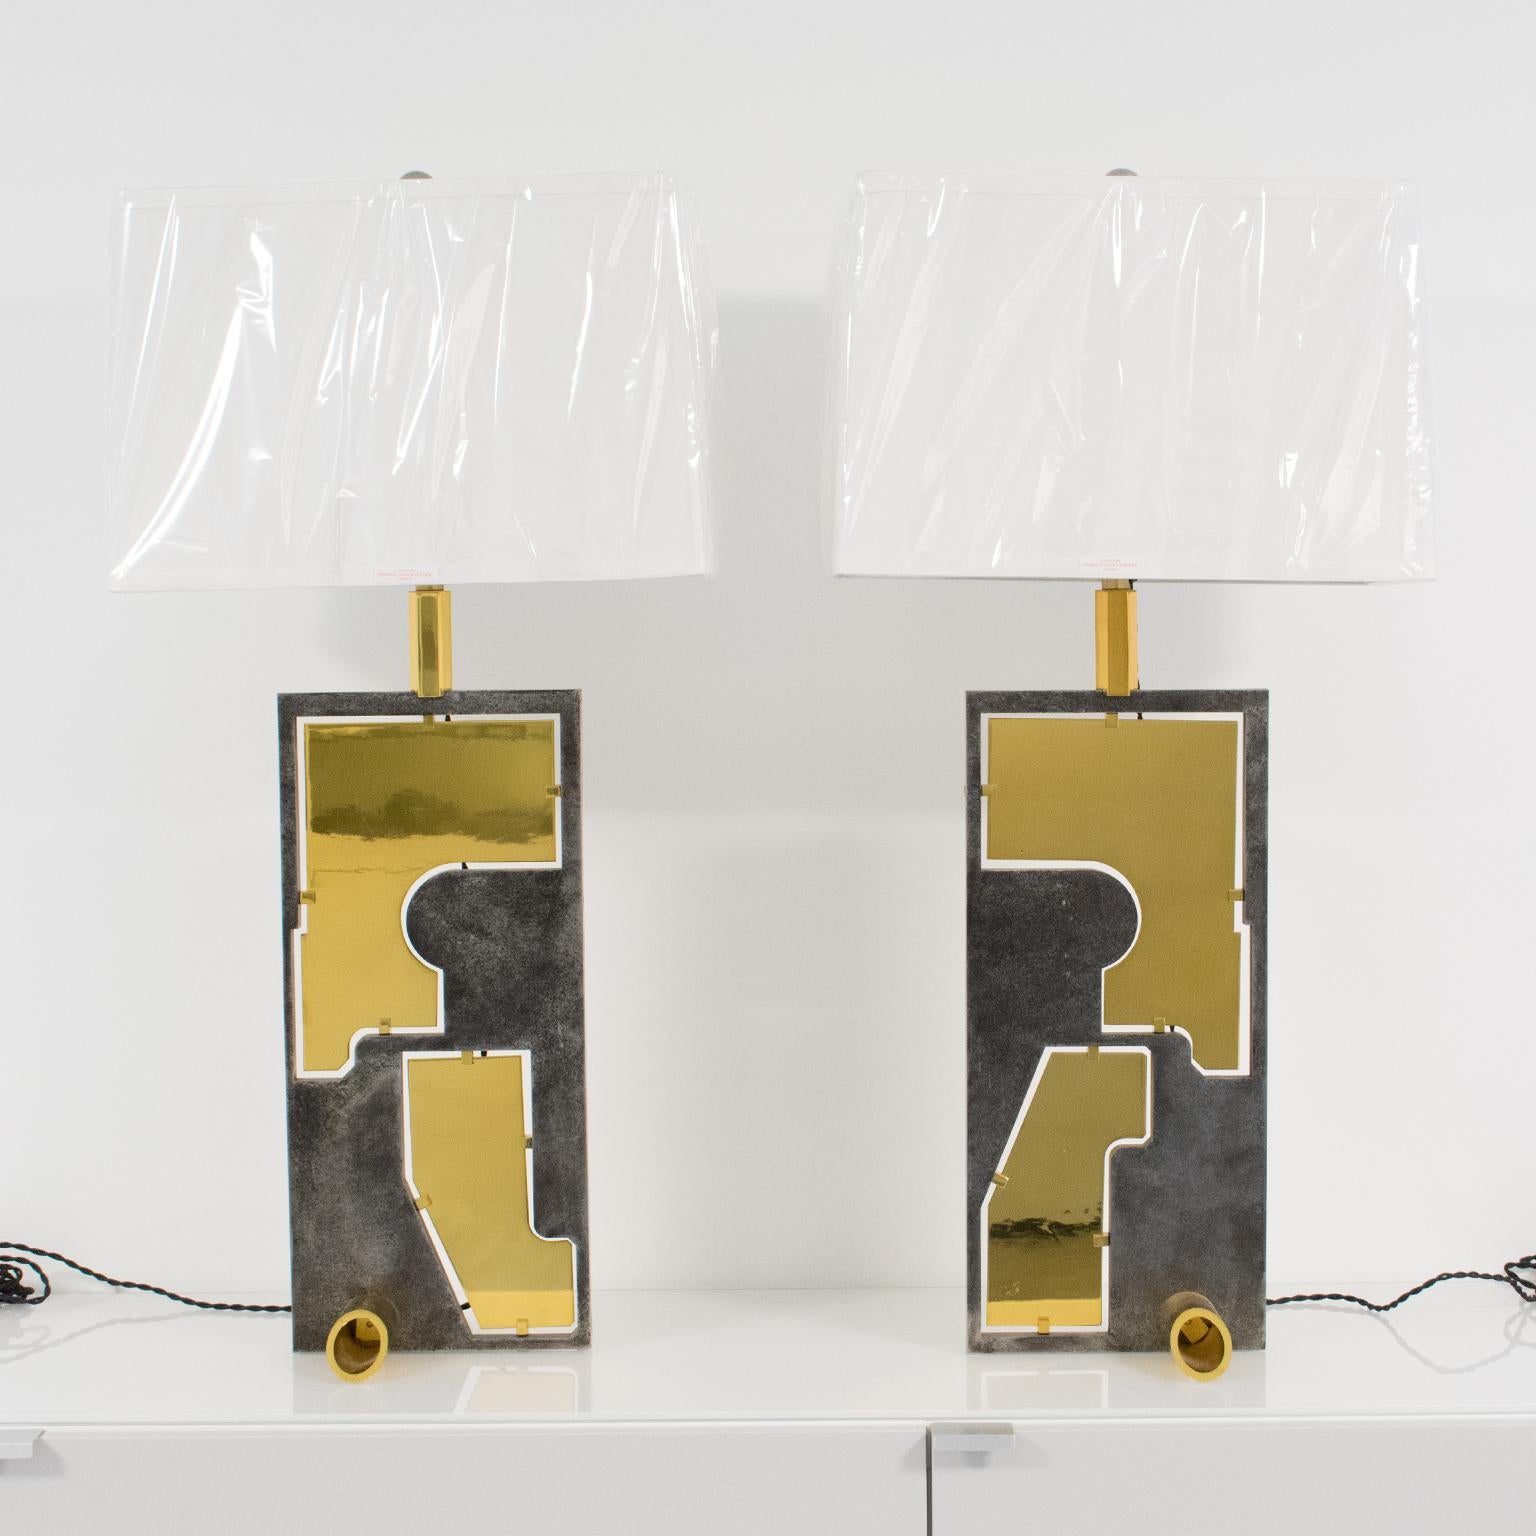 These impressive sculptural modernist industrial table lamps dated from the 1980s. They feature an elongated geometric shape with high gloss polished brass metal elements inserted in solid steel laser-cut molds and a sturdy tubular base in the same